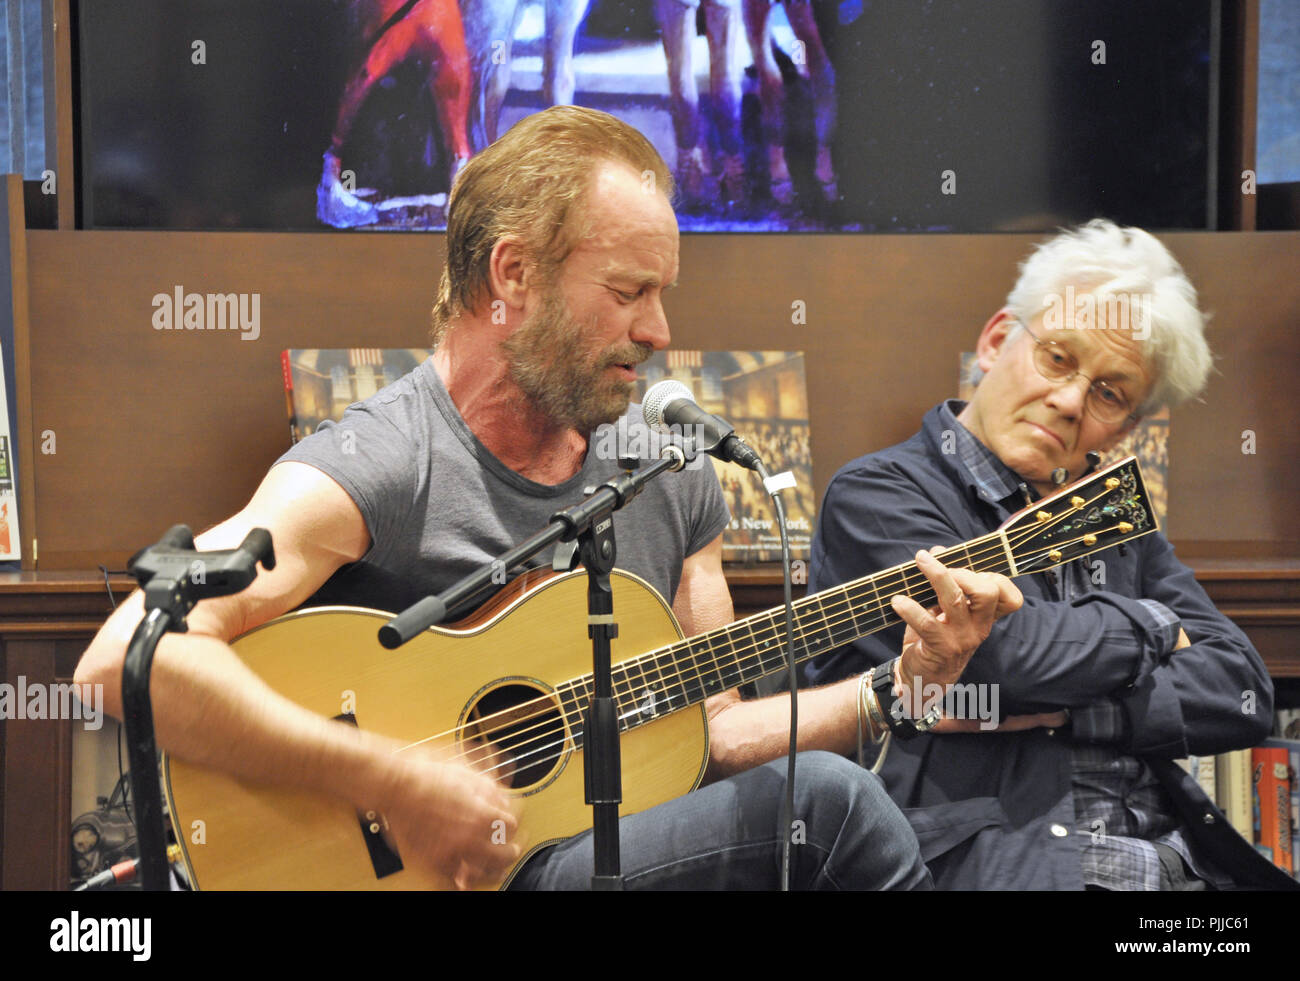 Sting Acoustic Guitar Performance Stock Photos & Sting Acoustic ...